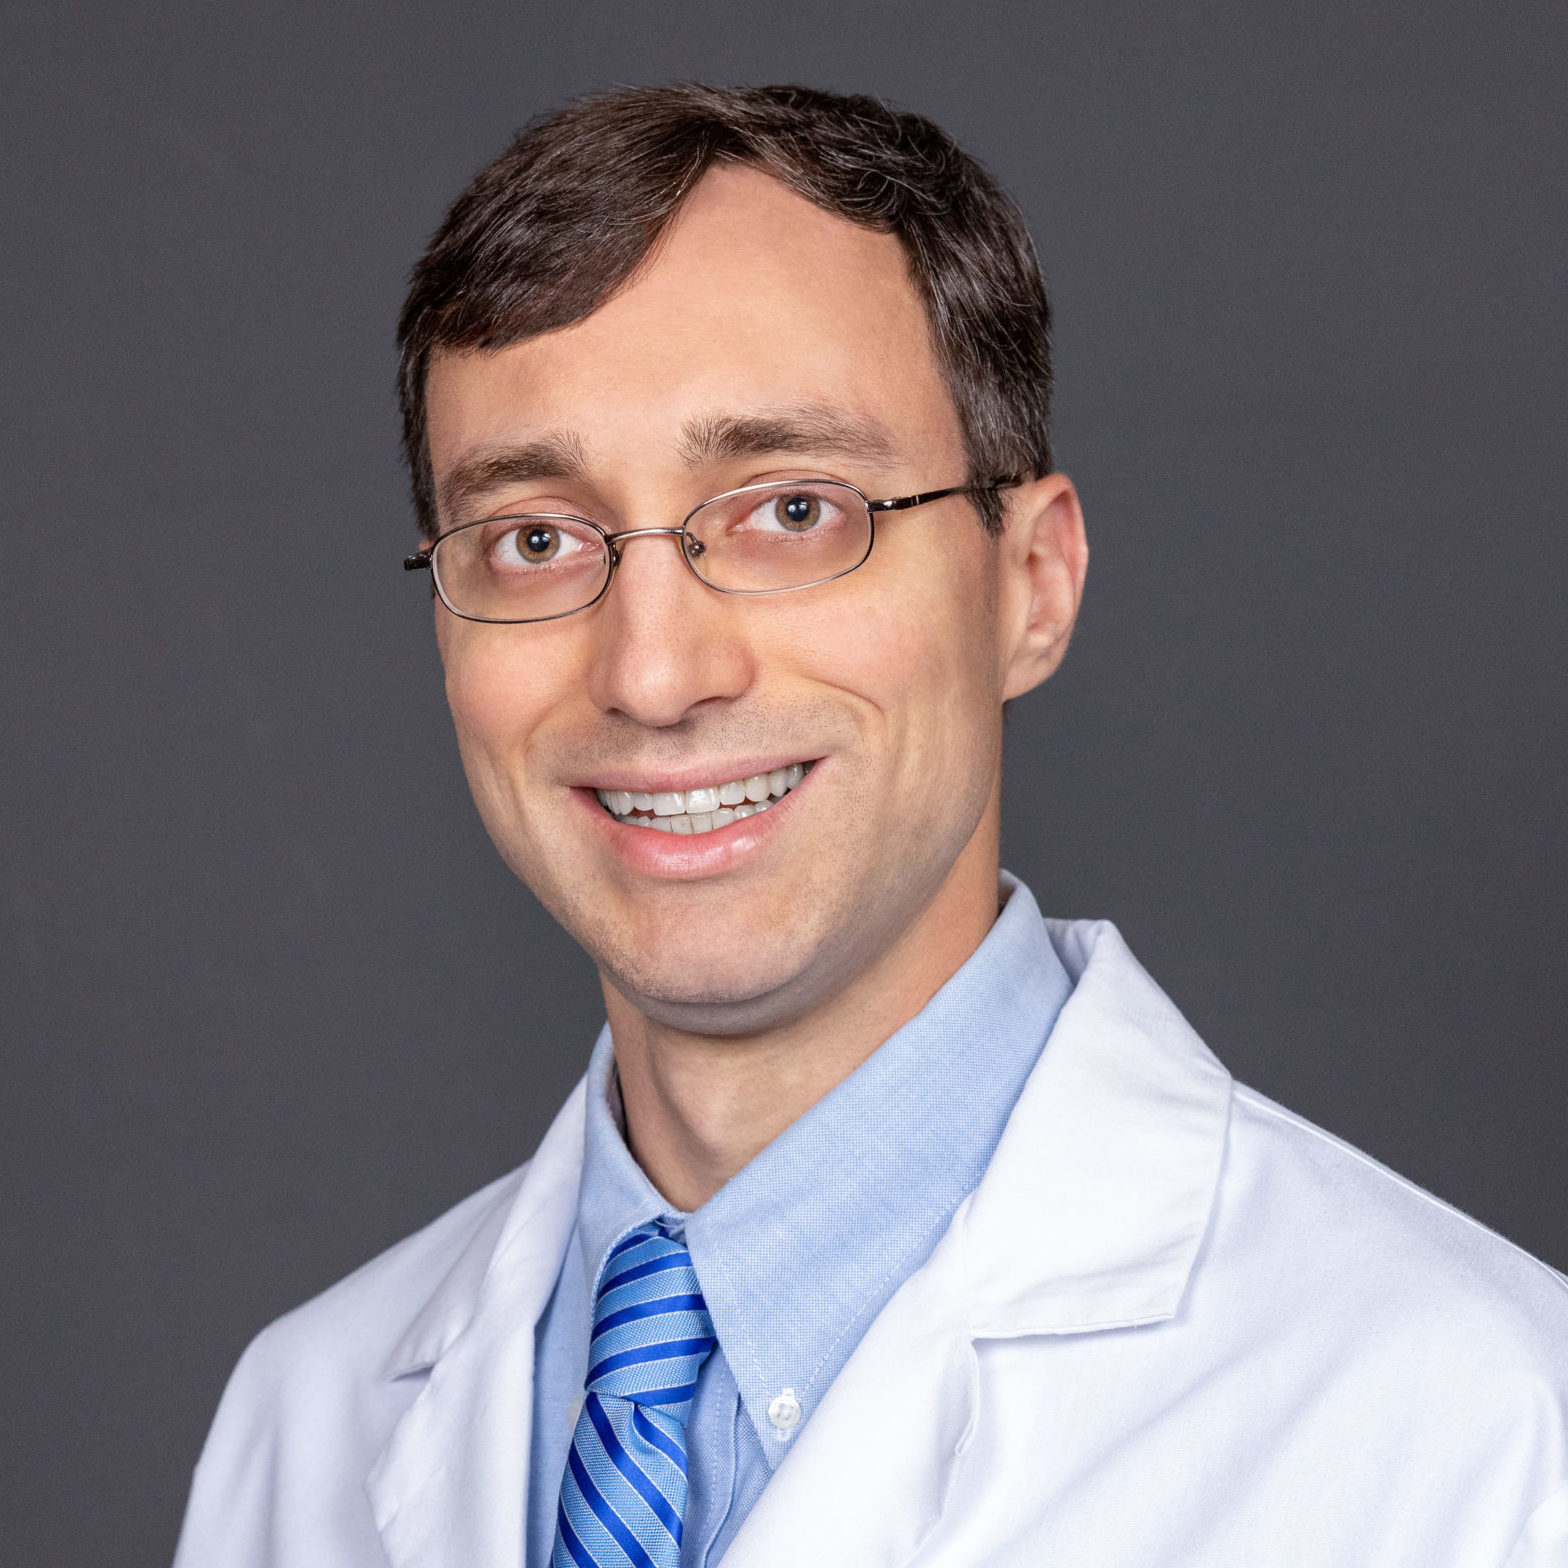 Picture of Zachary Reichenbach, MD, PhD, Lewis Katz School of Medicine, Temple University